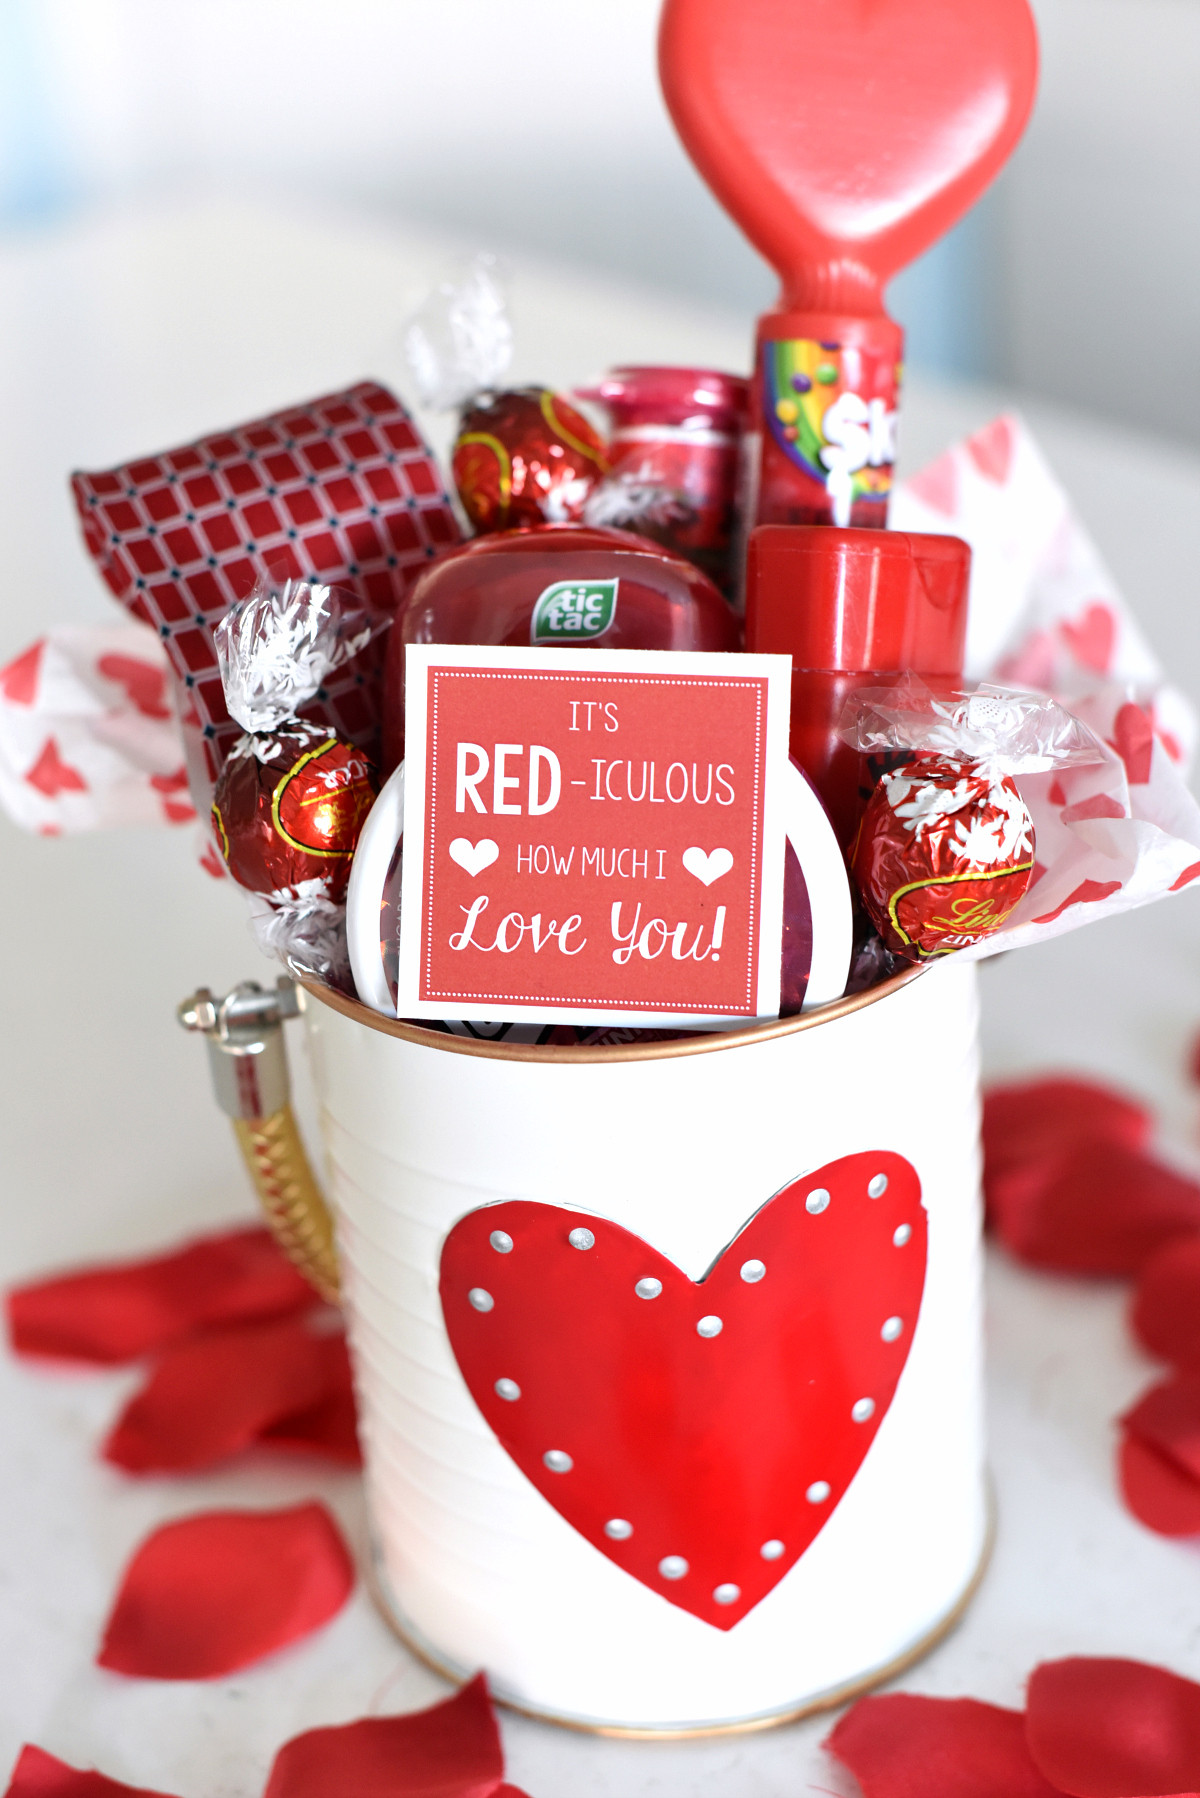 Cute Homemade Valentines Day Gifts
 25 DIY Valentine s Day Gift Ideas Teens Will Love